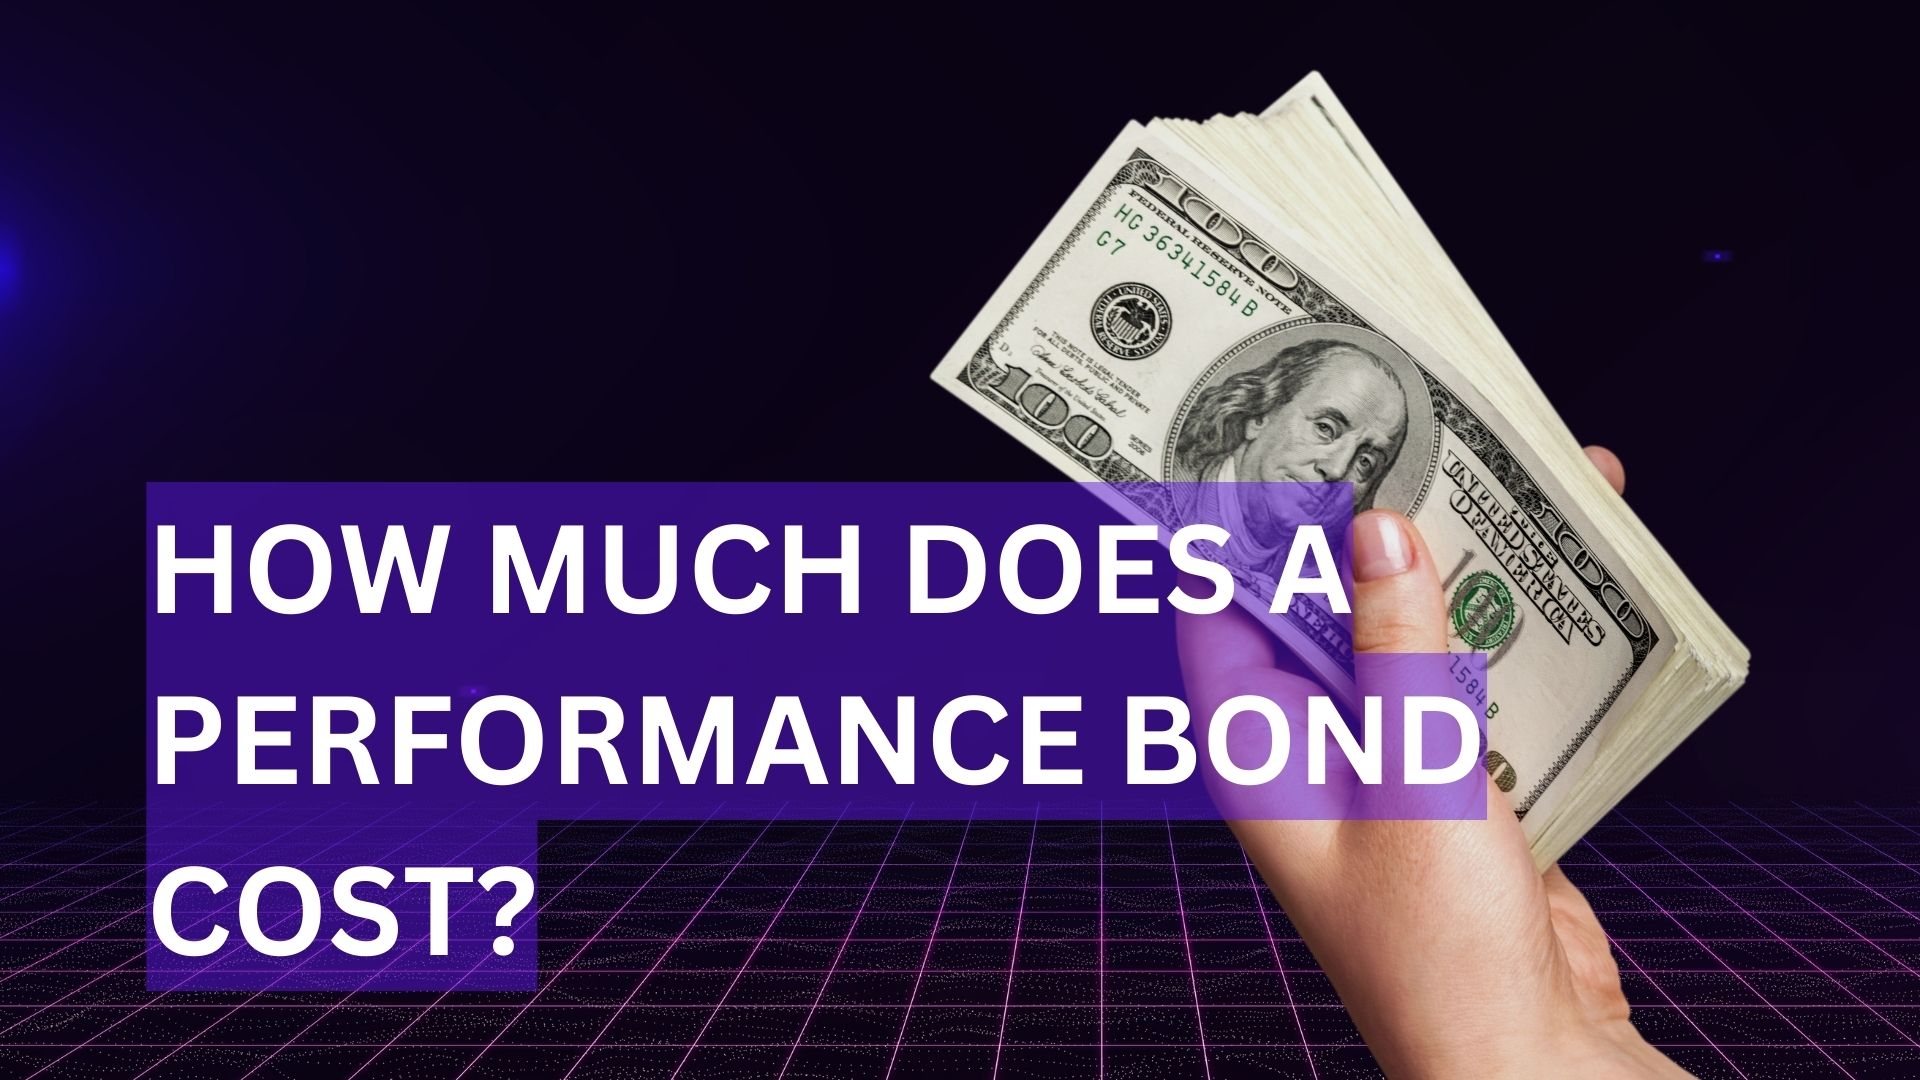 How Much Does a Performance Bond Cost?